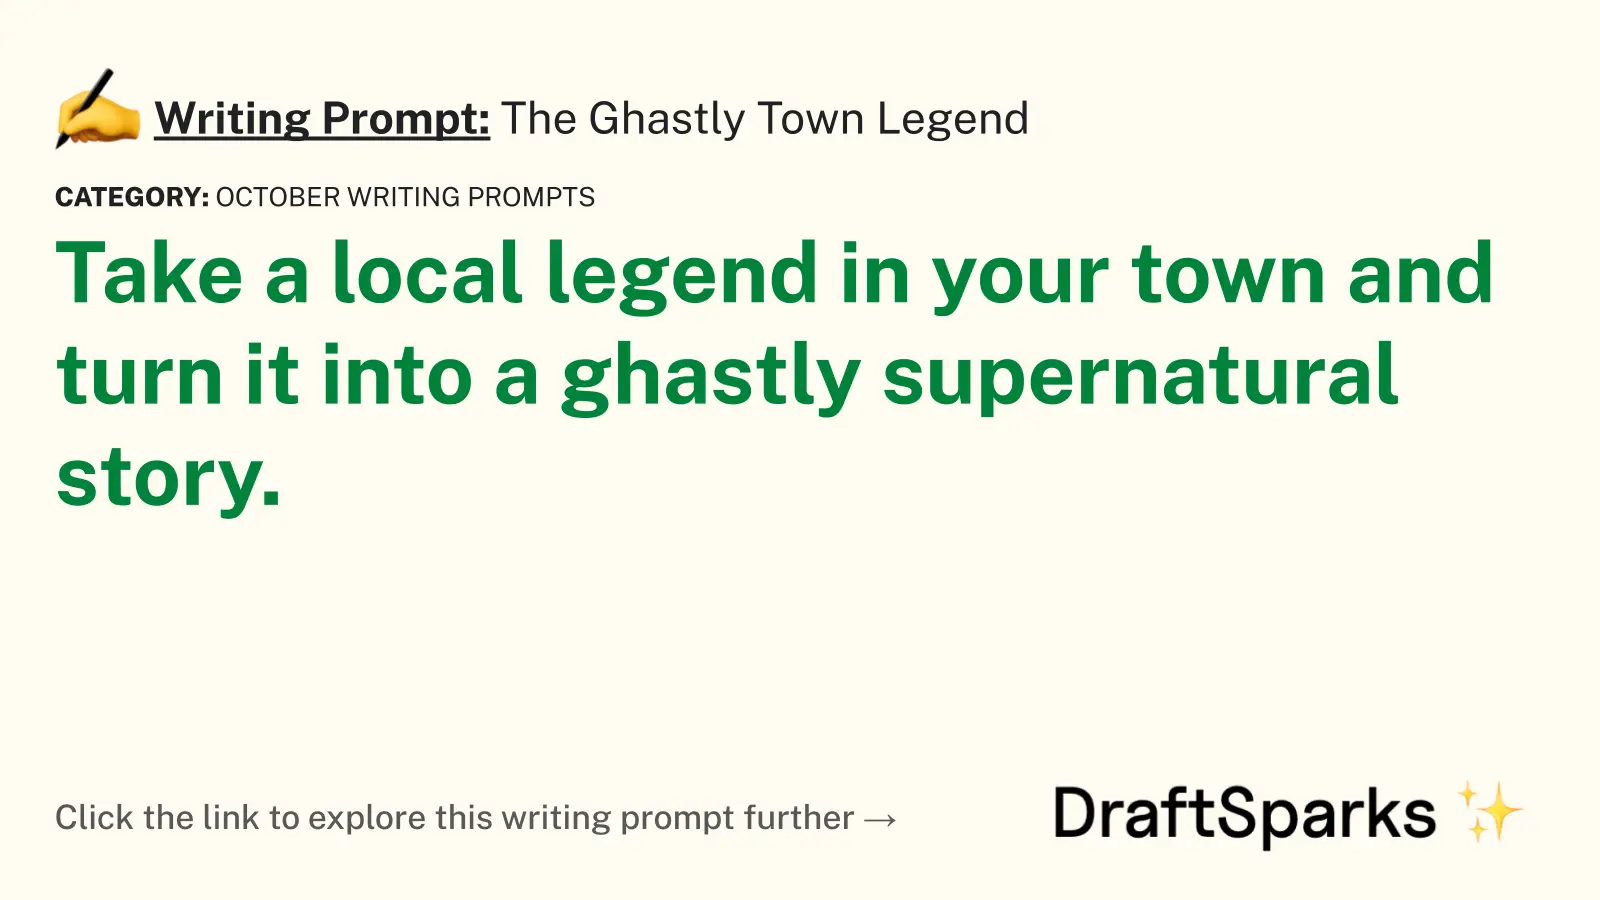 The Ghastly Town Legend